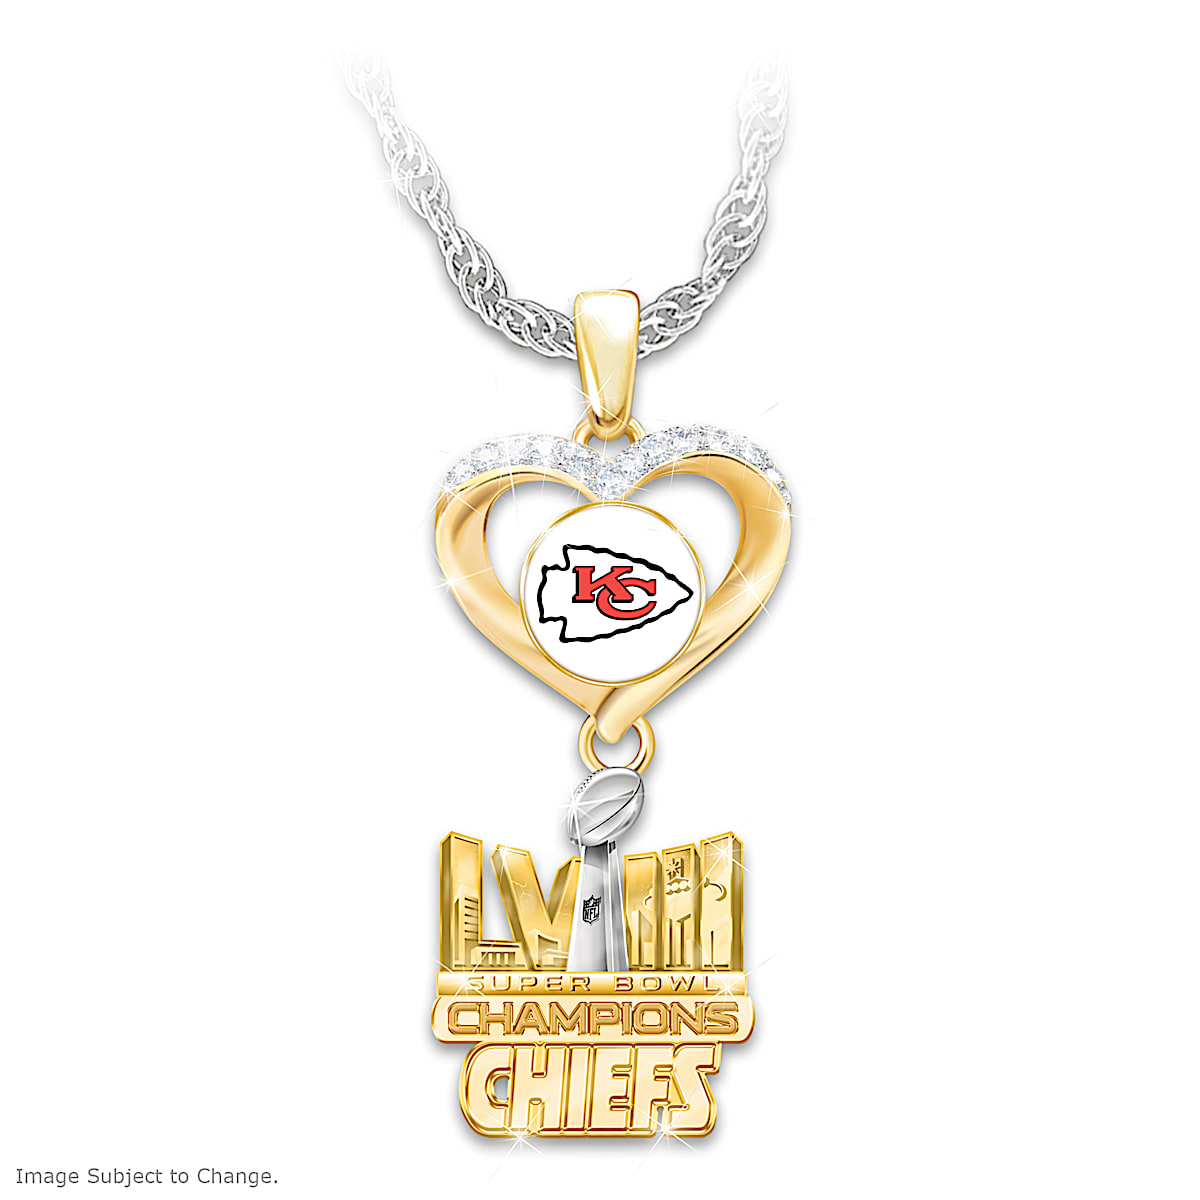 Taylor Swift Wore This BaubleBar NFL Necklace at the Chiefs Championship  Game